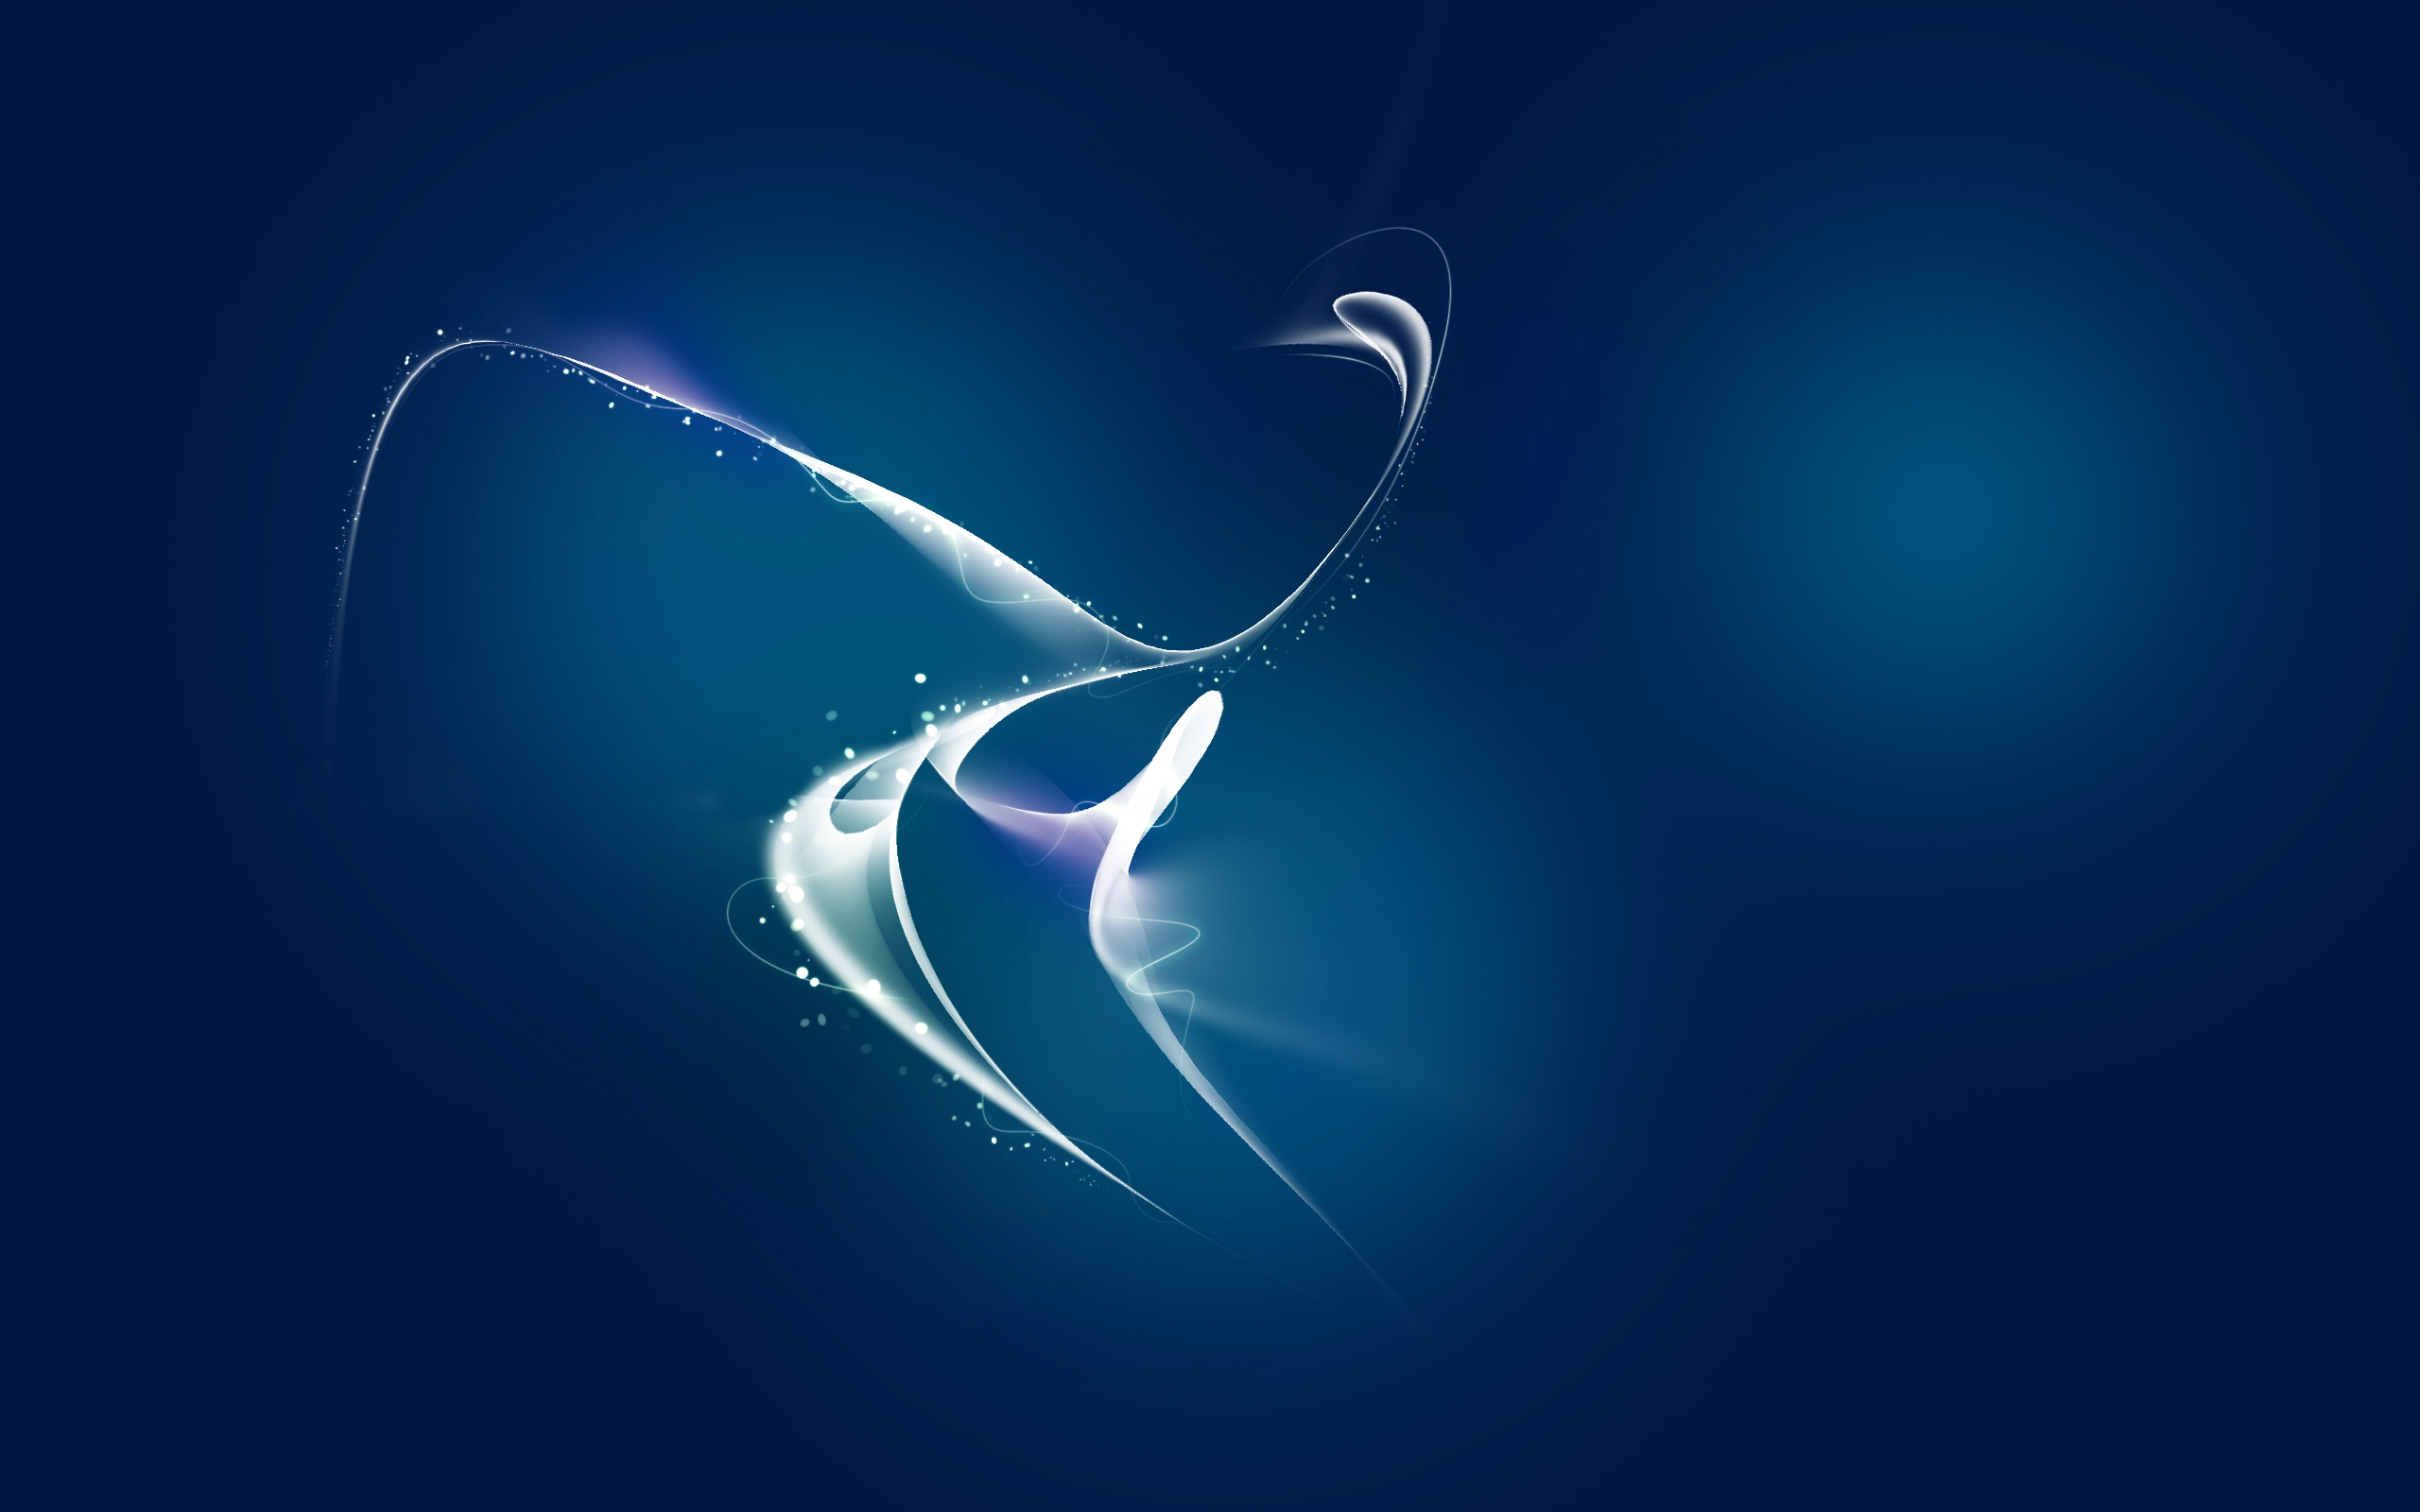 Abstract Design for 2560 x 1600 widescreen resolution